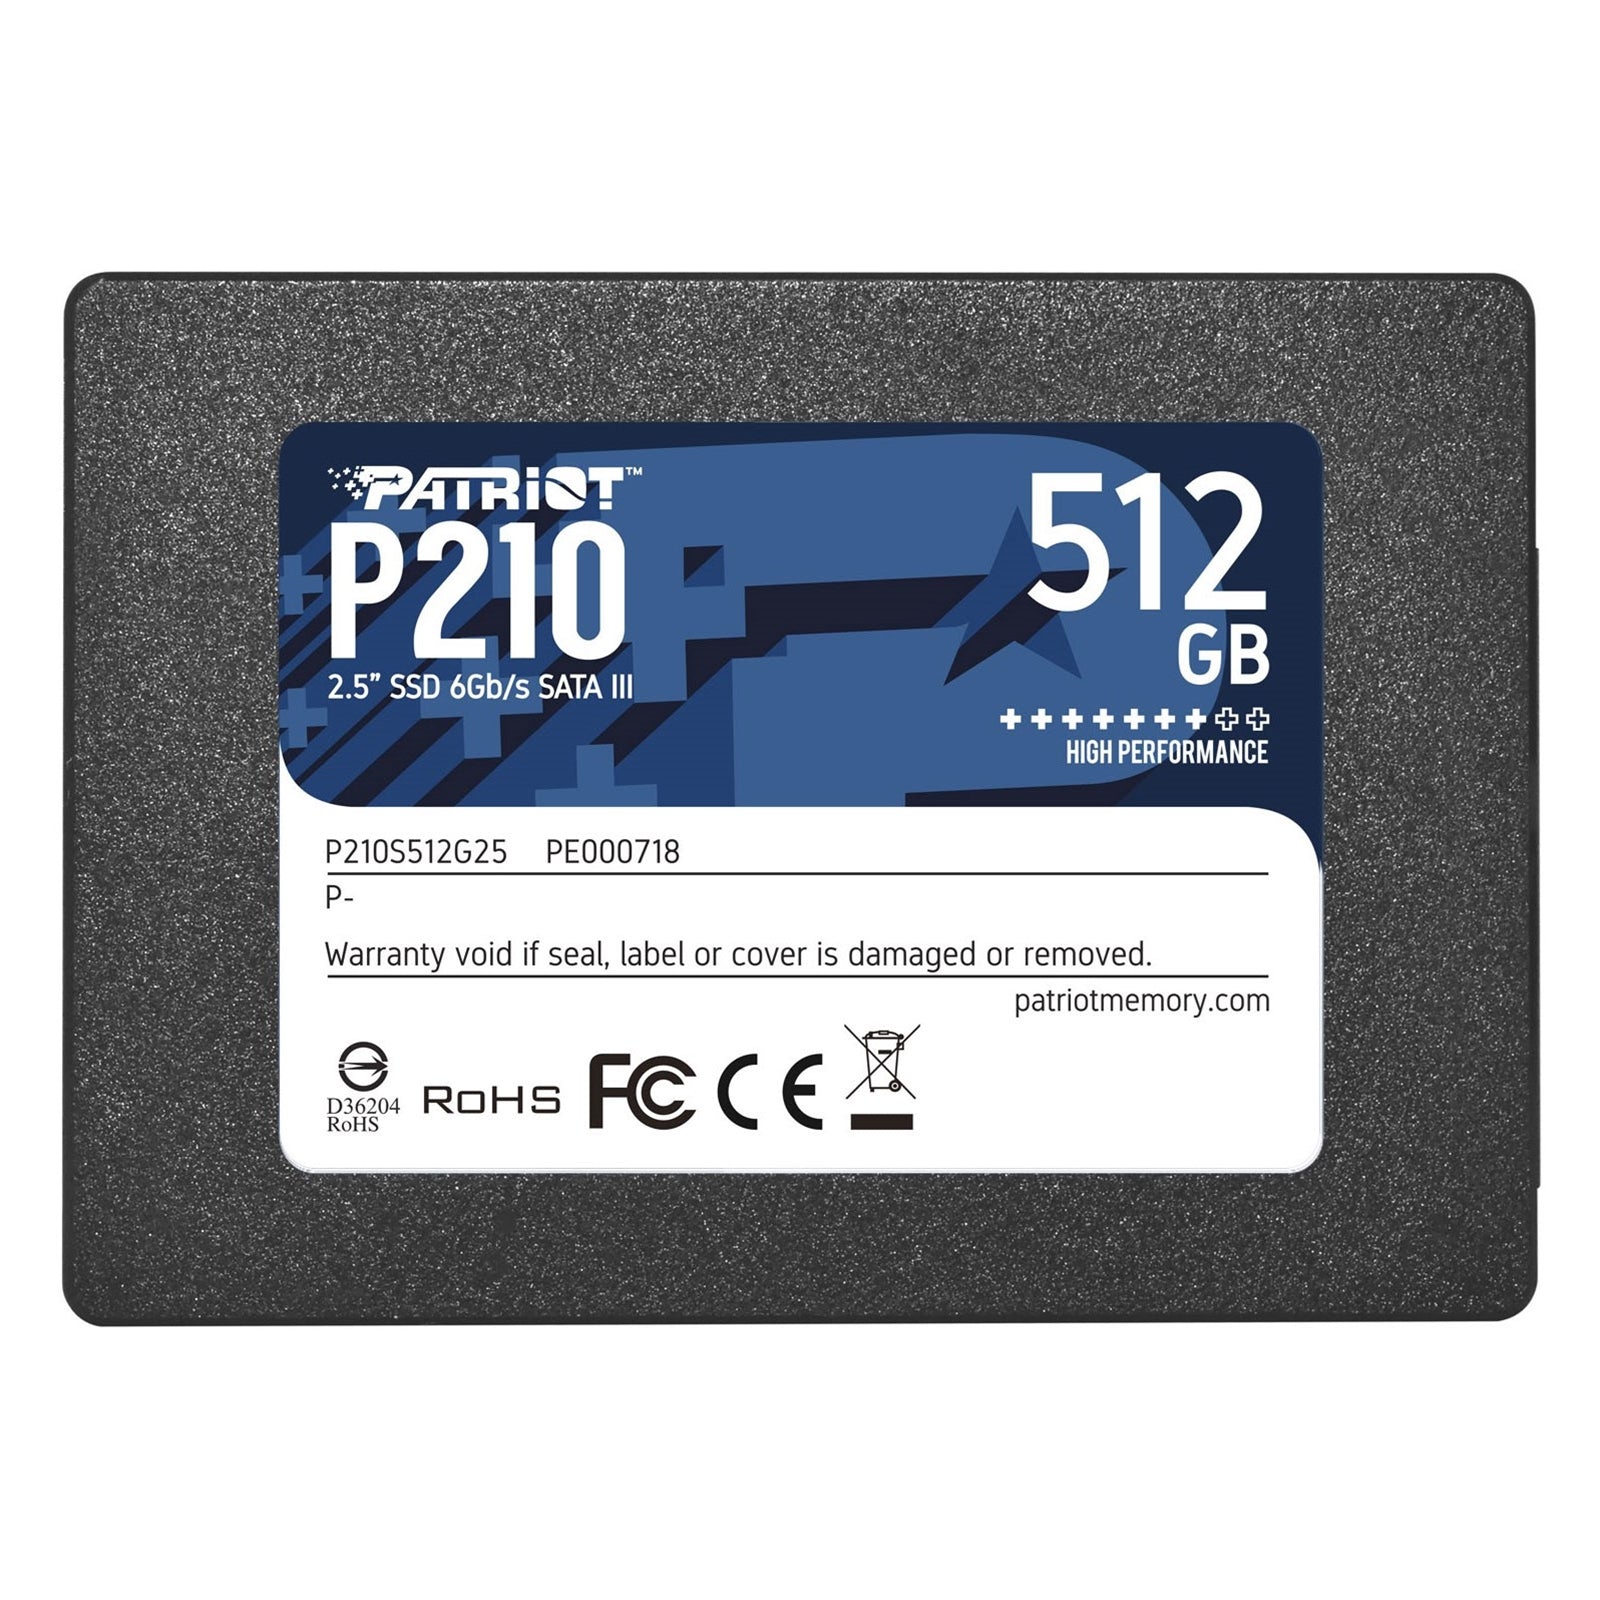 Patriot P210 512GB SSD High-Speed SATA III Interface Solid State Drive